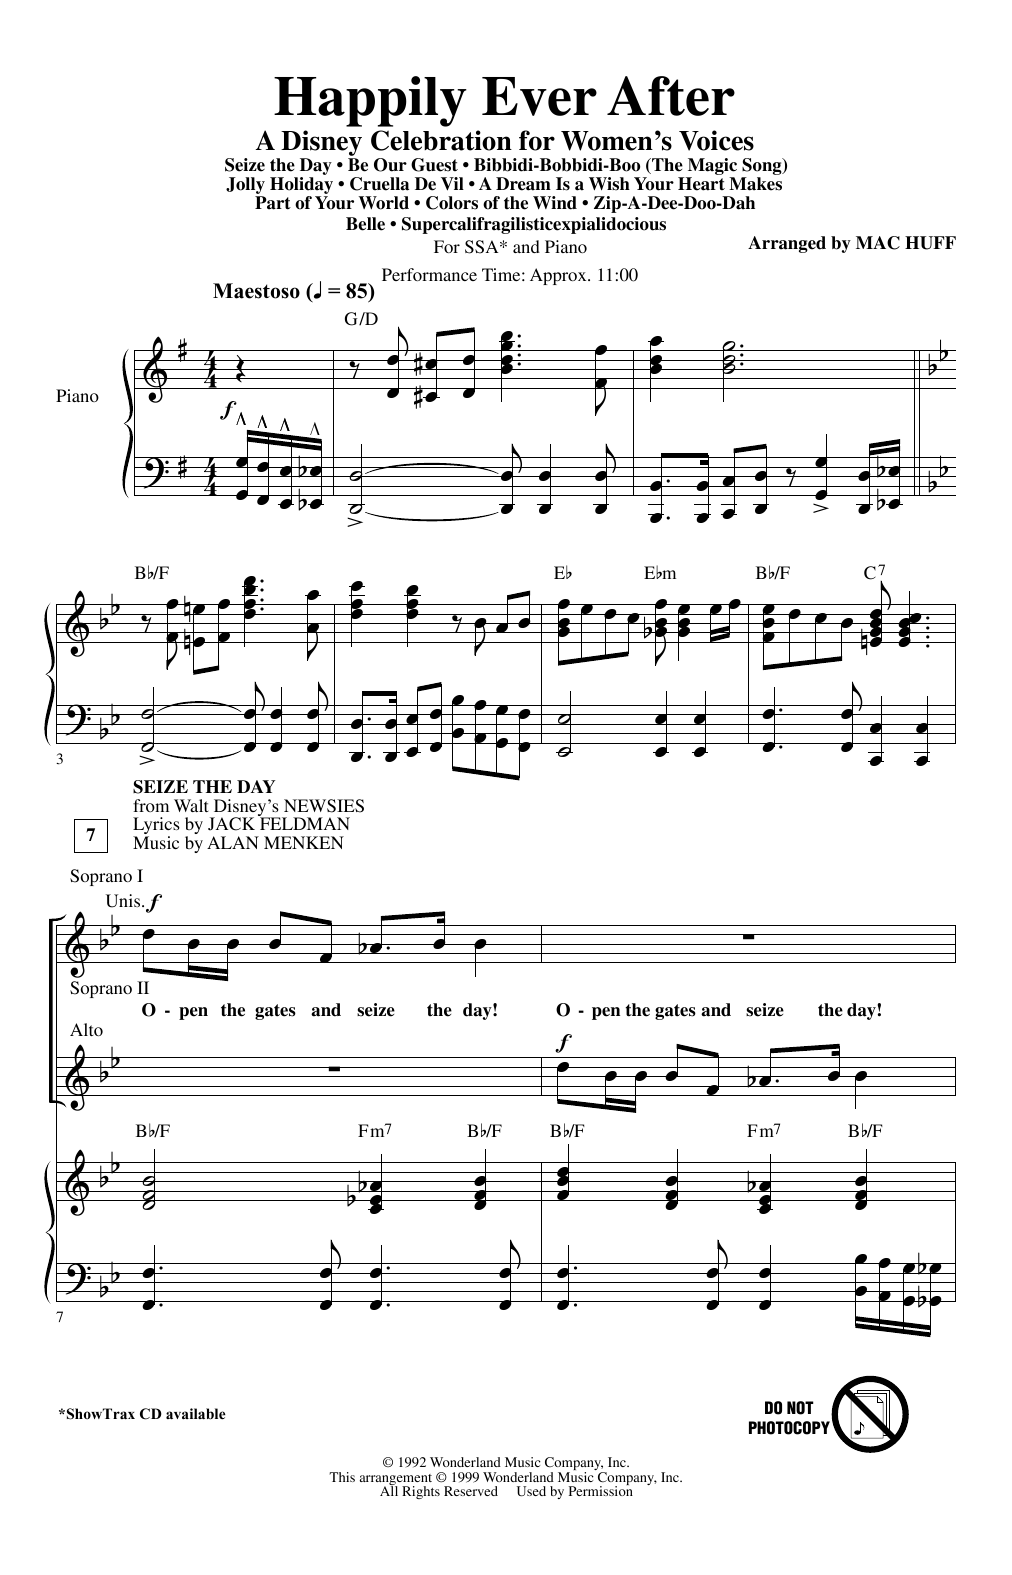 Download Mac Huff Happily Ever After - A Disney Celebrati Sheet Music